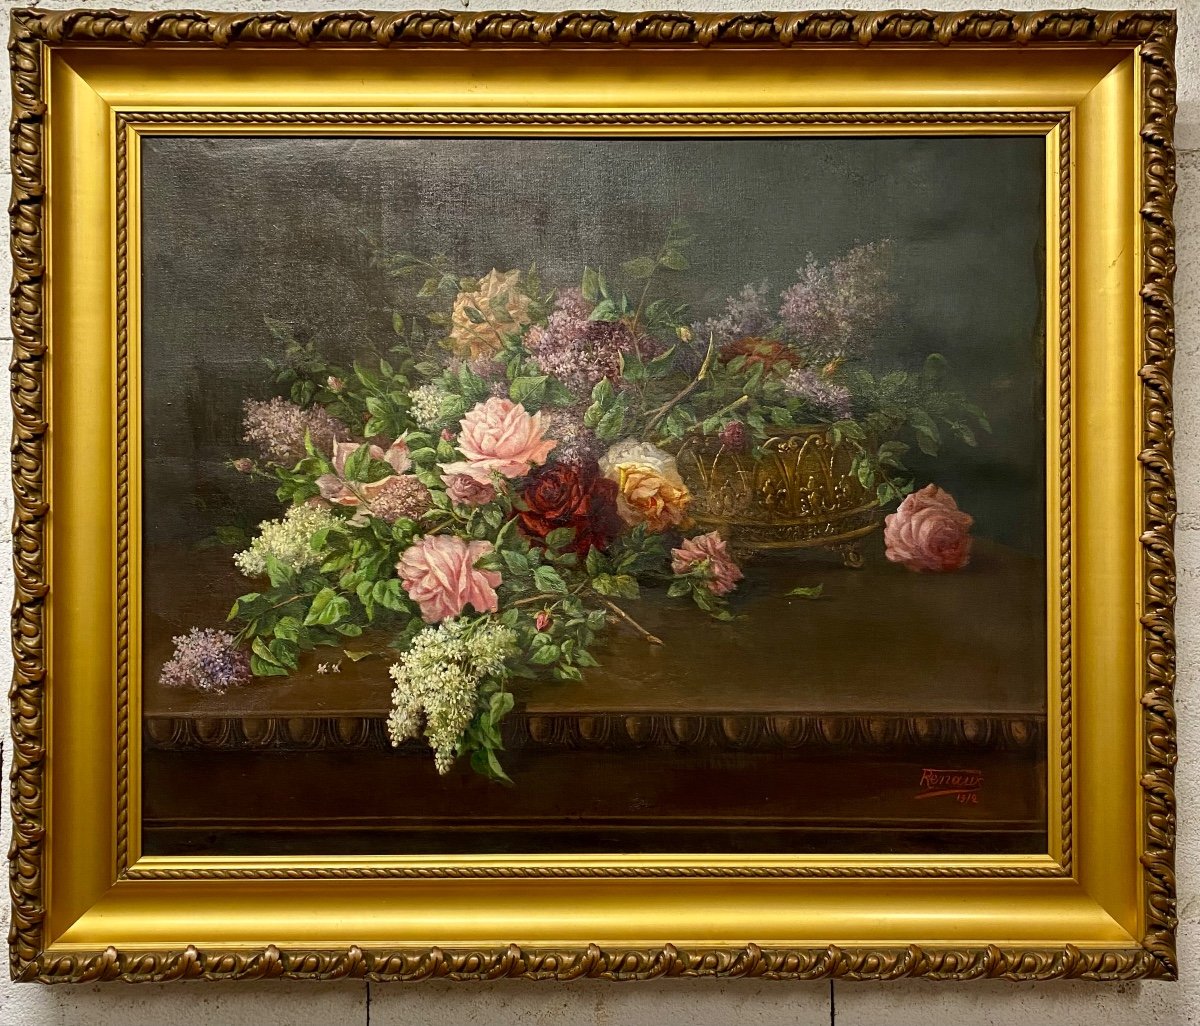 Renals 19th Century. Still Life With Lilacs And Roses 